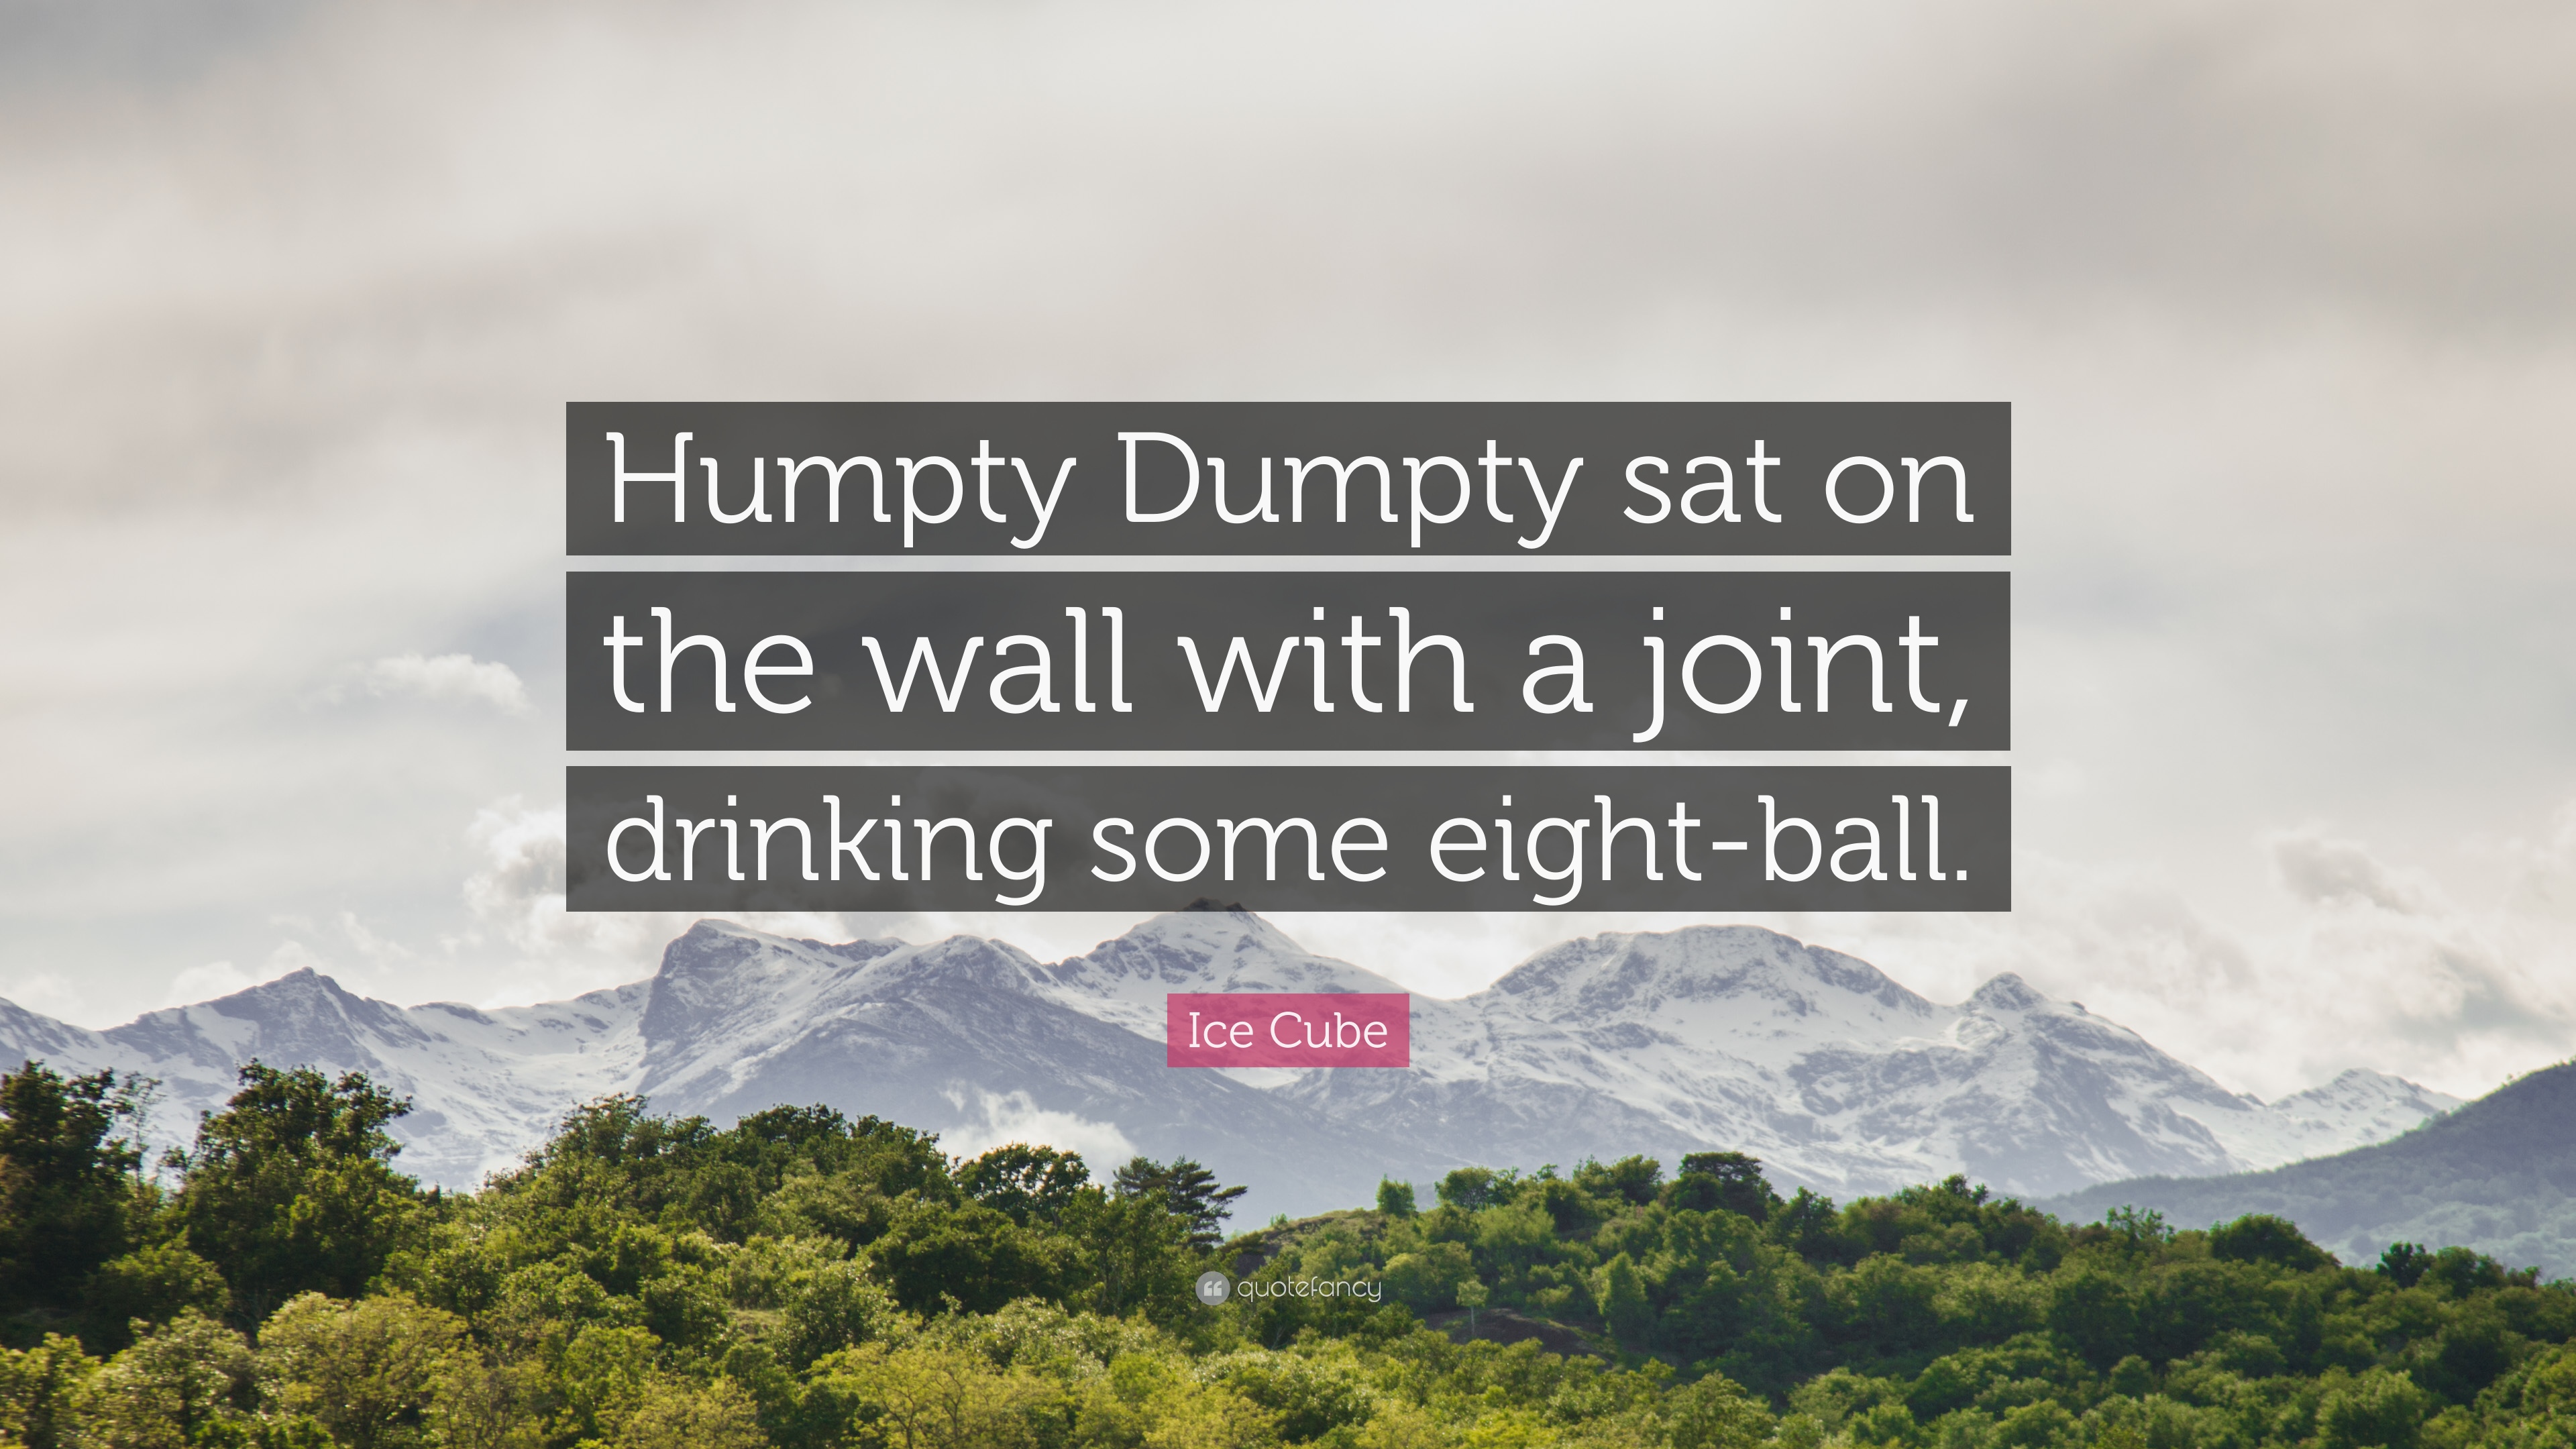 Ice Cube Quote: “Humpty Dumpty sat on the wall with a joint